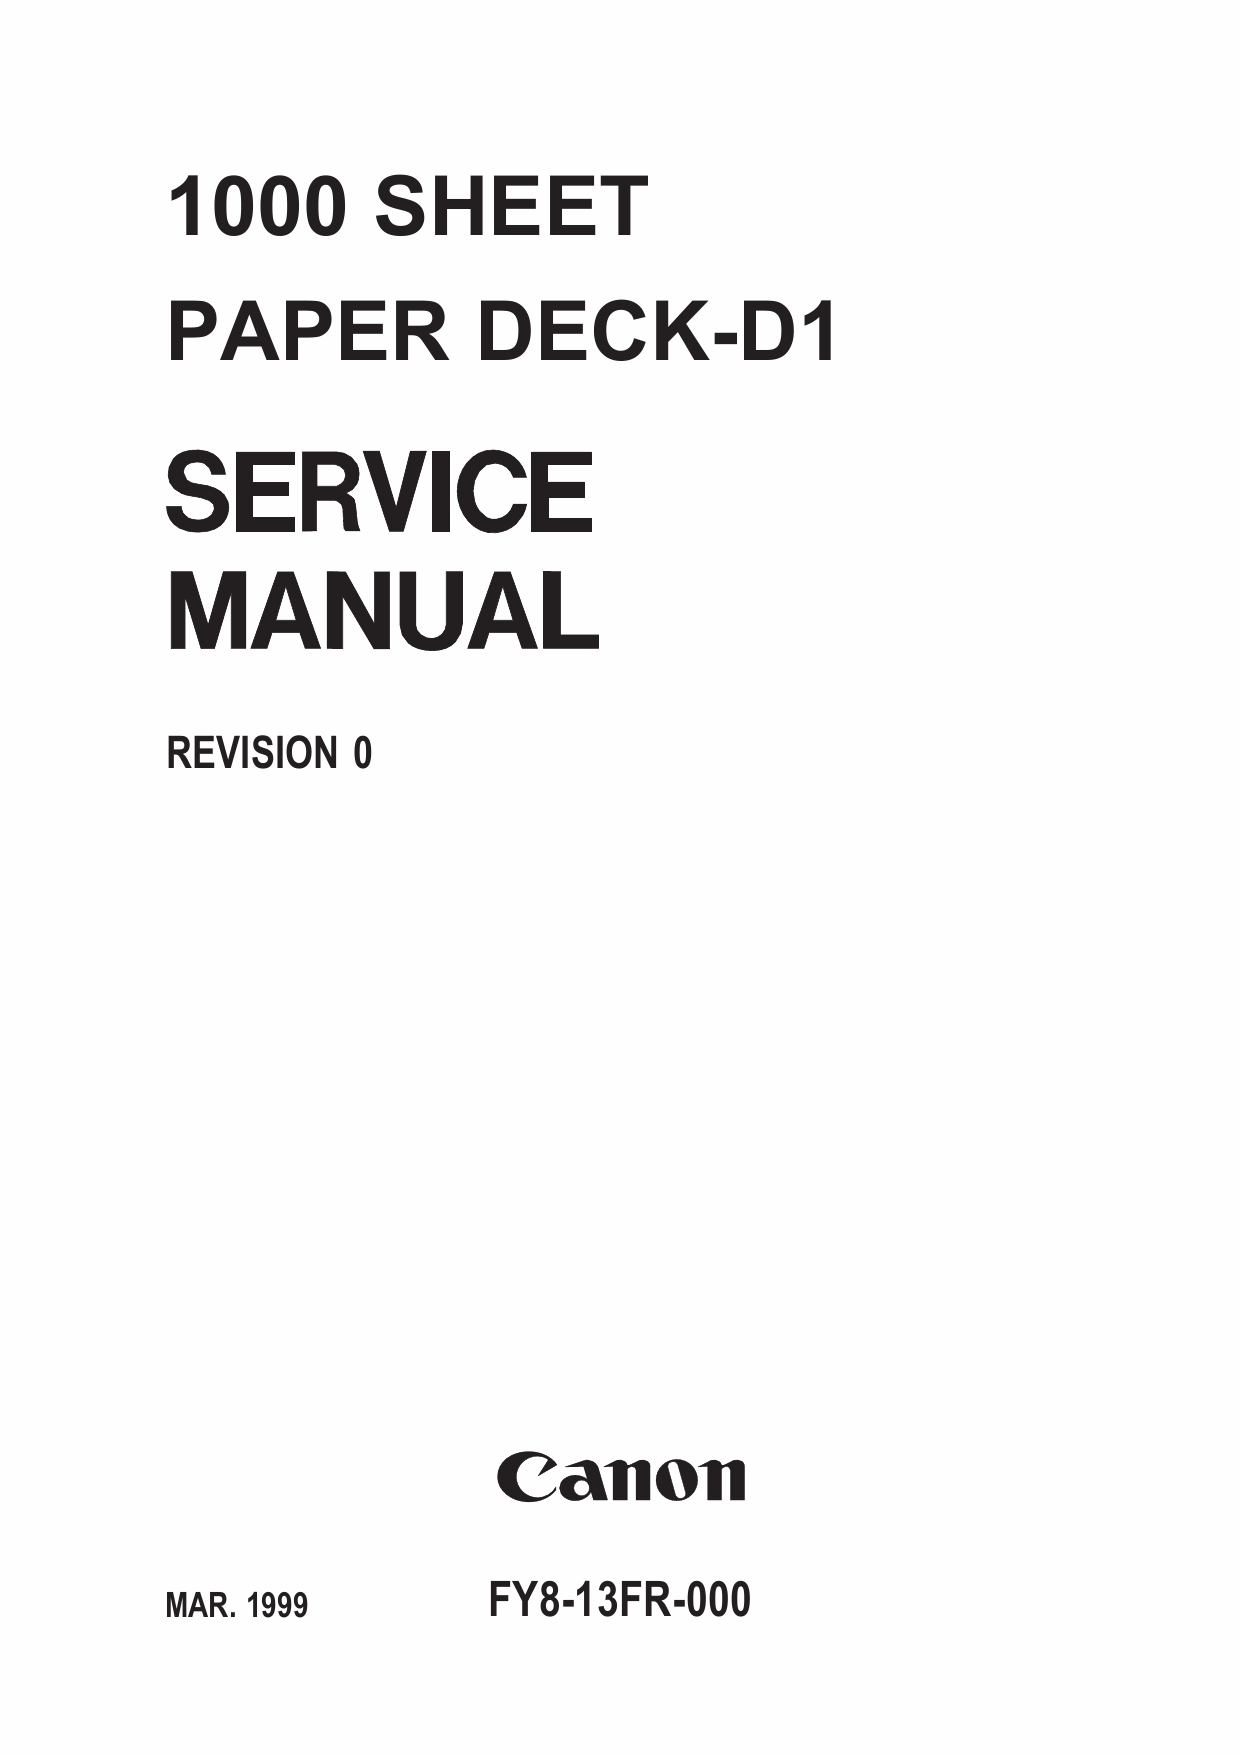 Canon Options Sheet1000 Paper-Deck D1 Parts and Service Manual-1